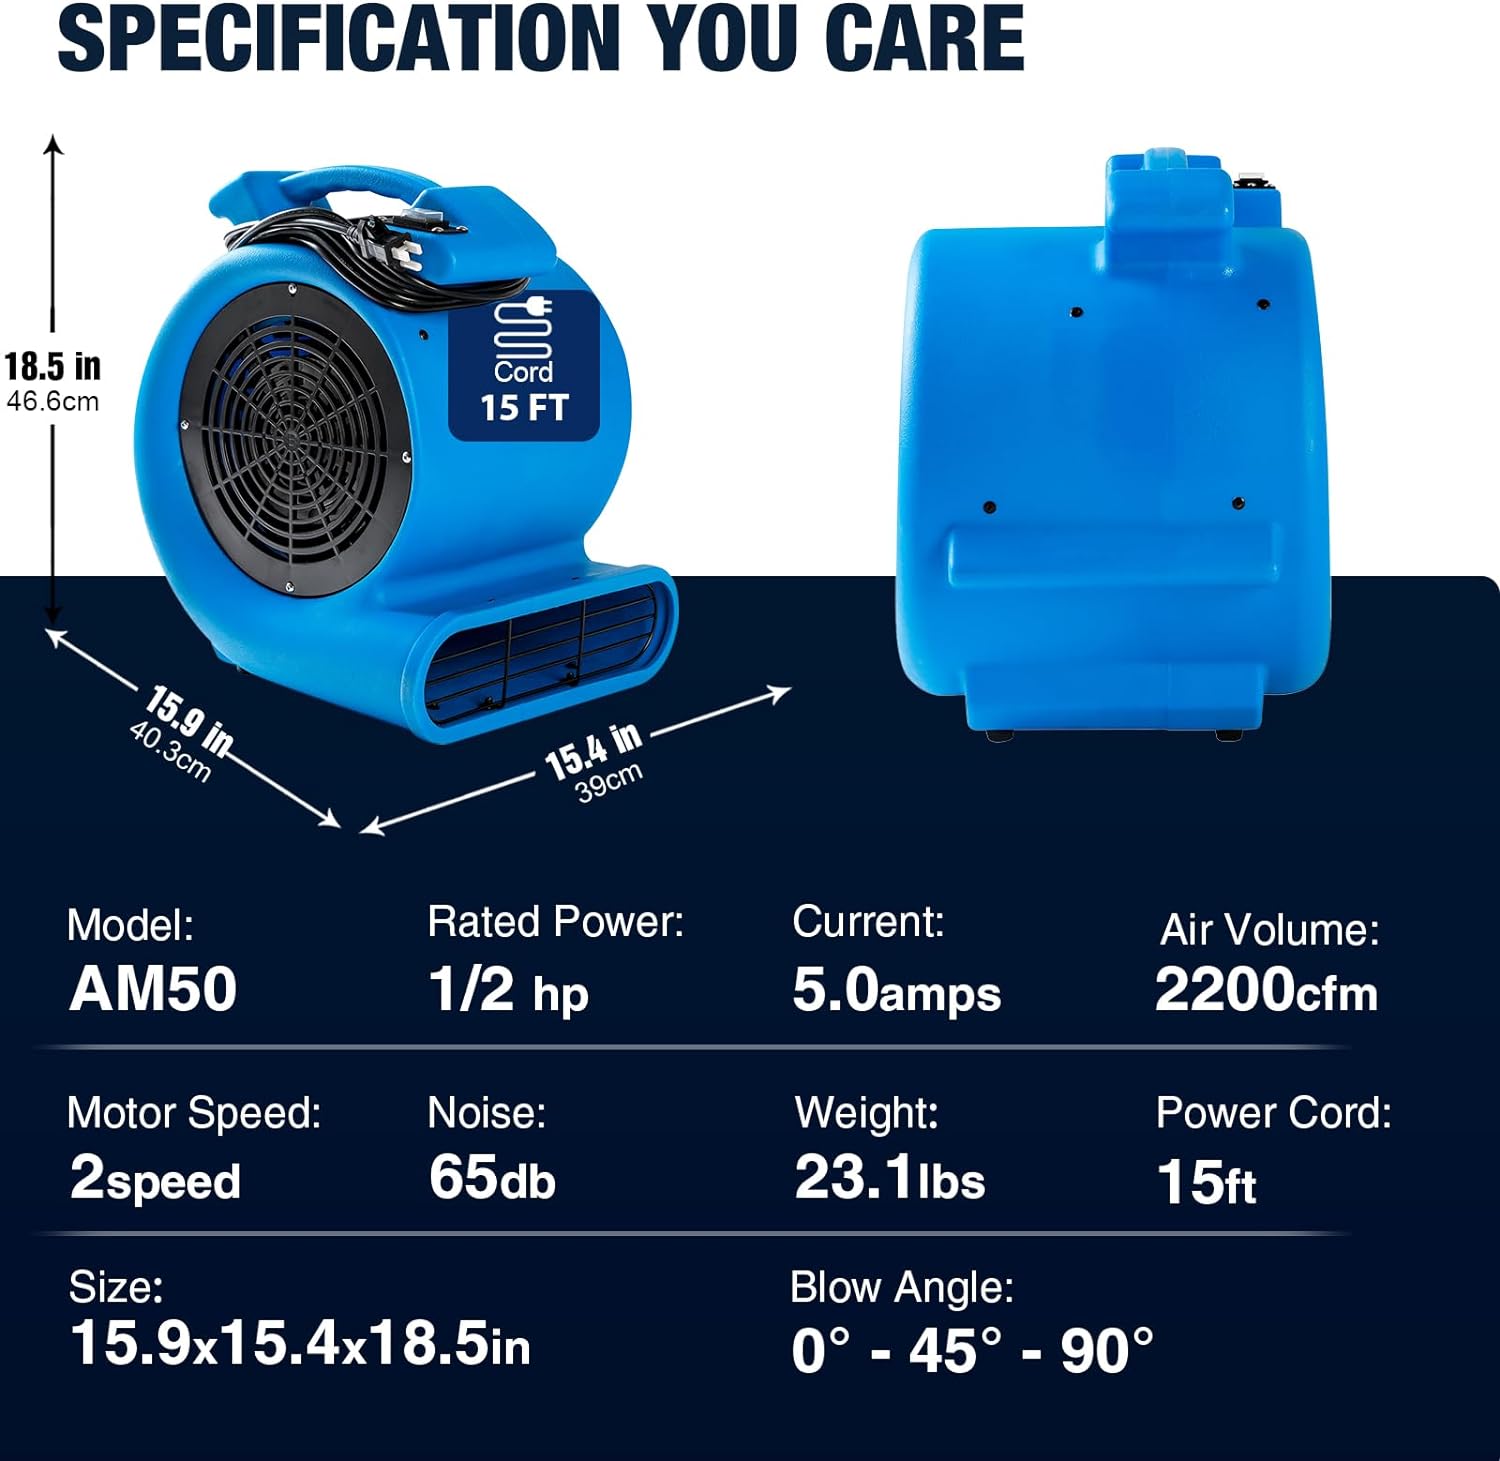 Mounto Air Mover Floor Drying Blower Fan 2200 CFM Air Flow for Drying Cooling Circulation